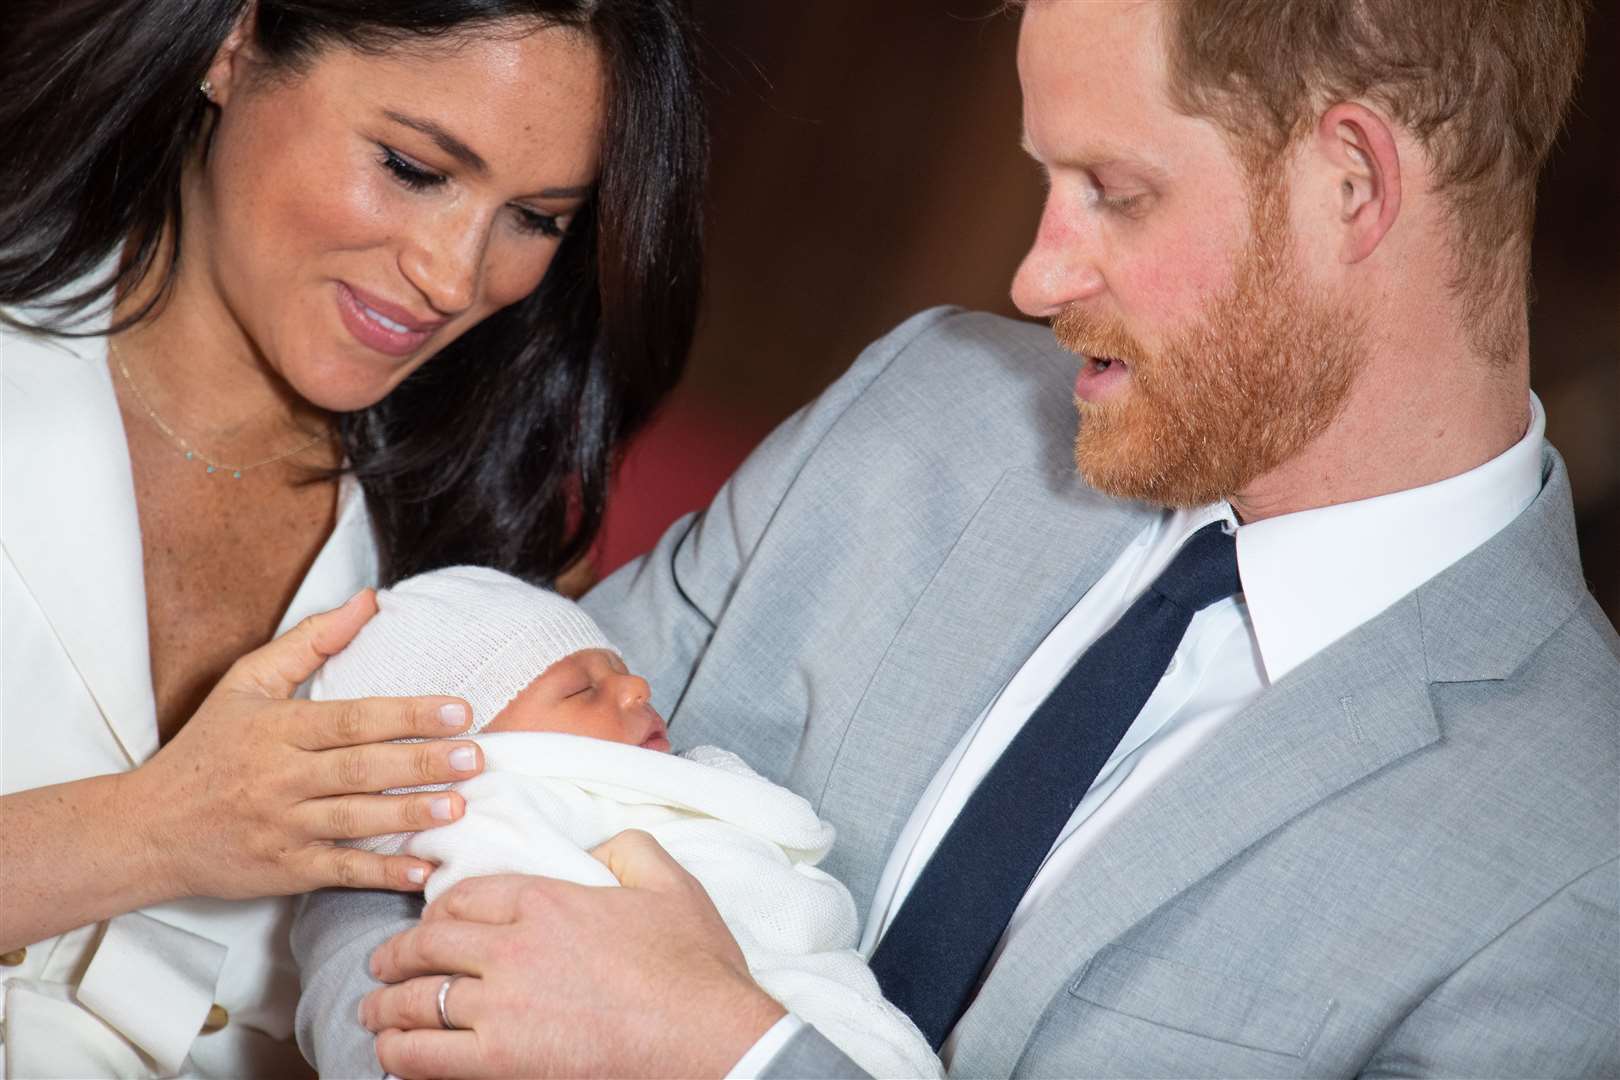 The Duke and Duchess of Sussex with their baby son Archie in May 2019 (Dominic Lipinski/PA)